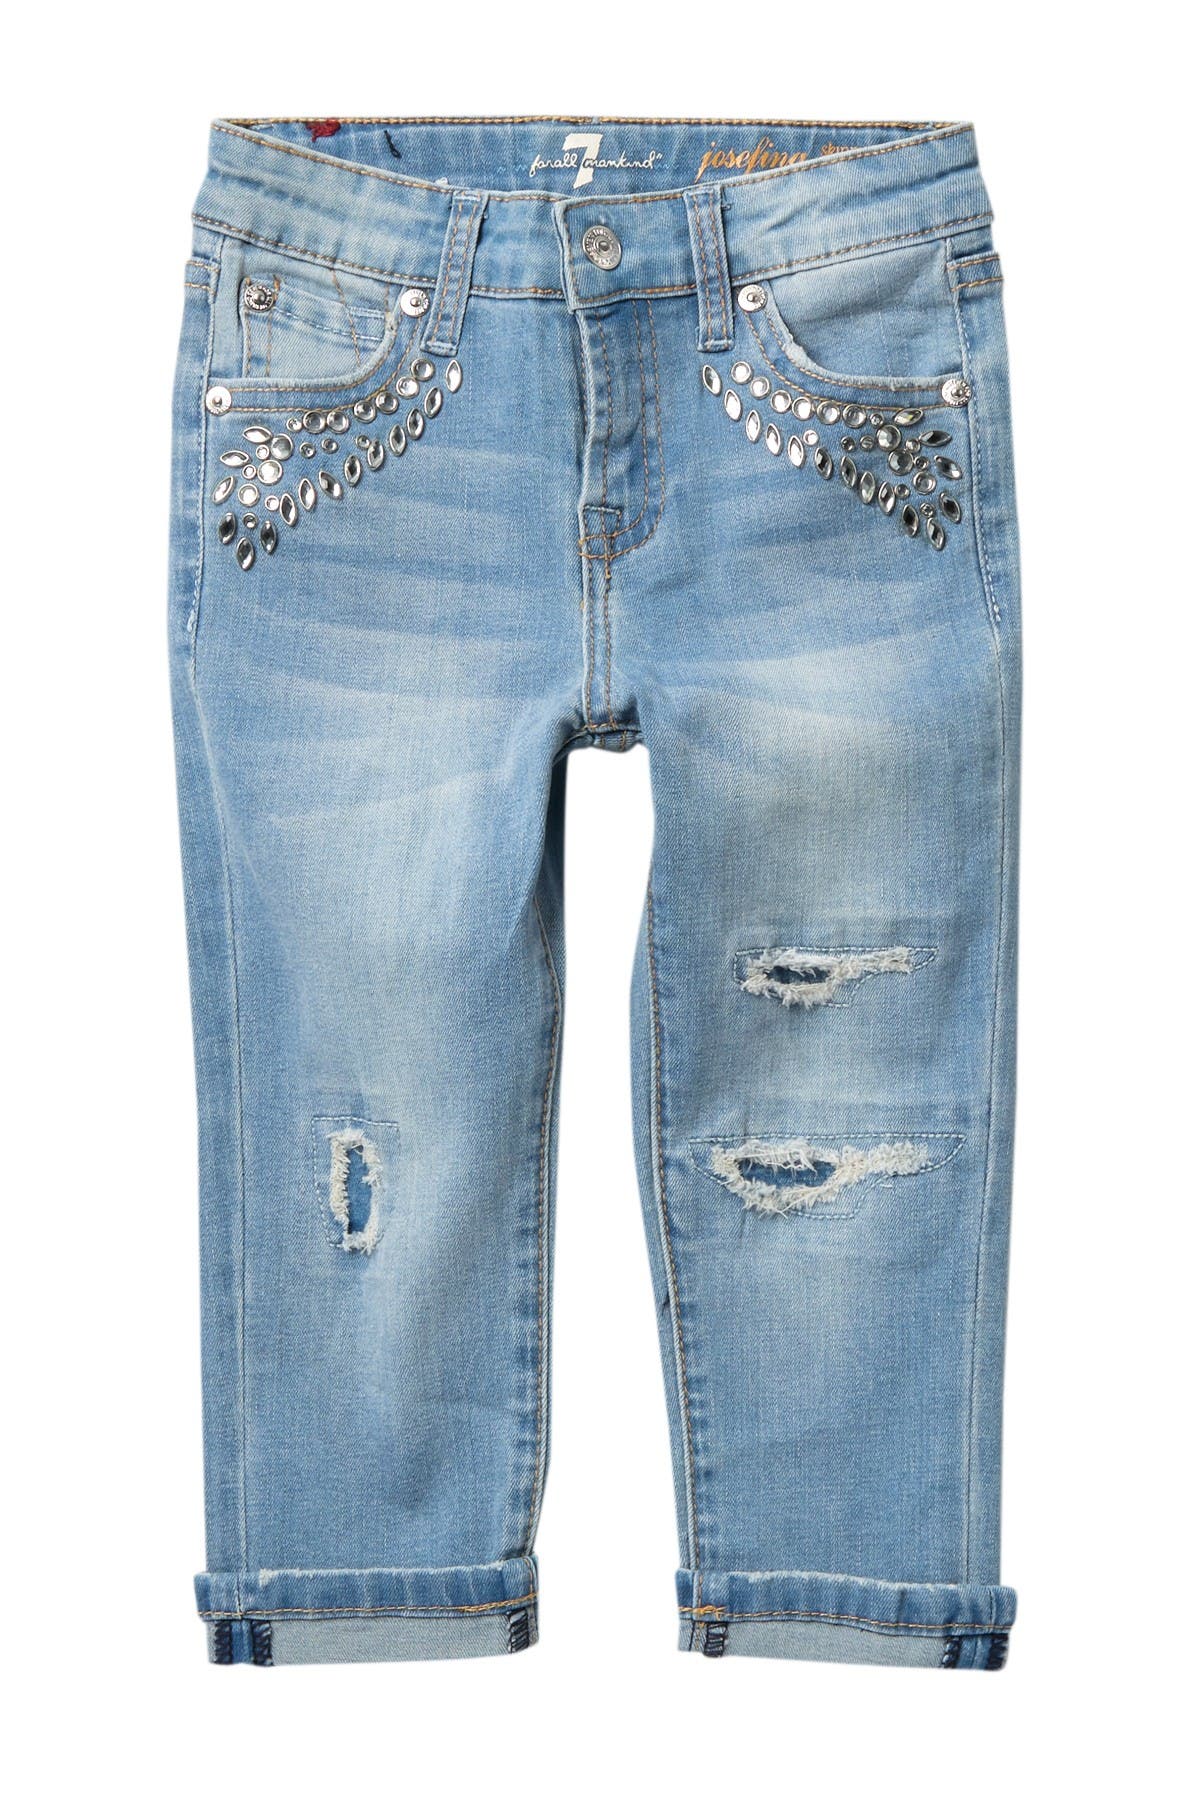 7 for all mankind girls jeans